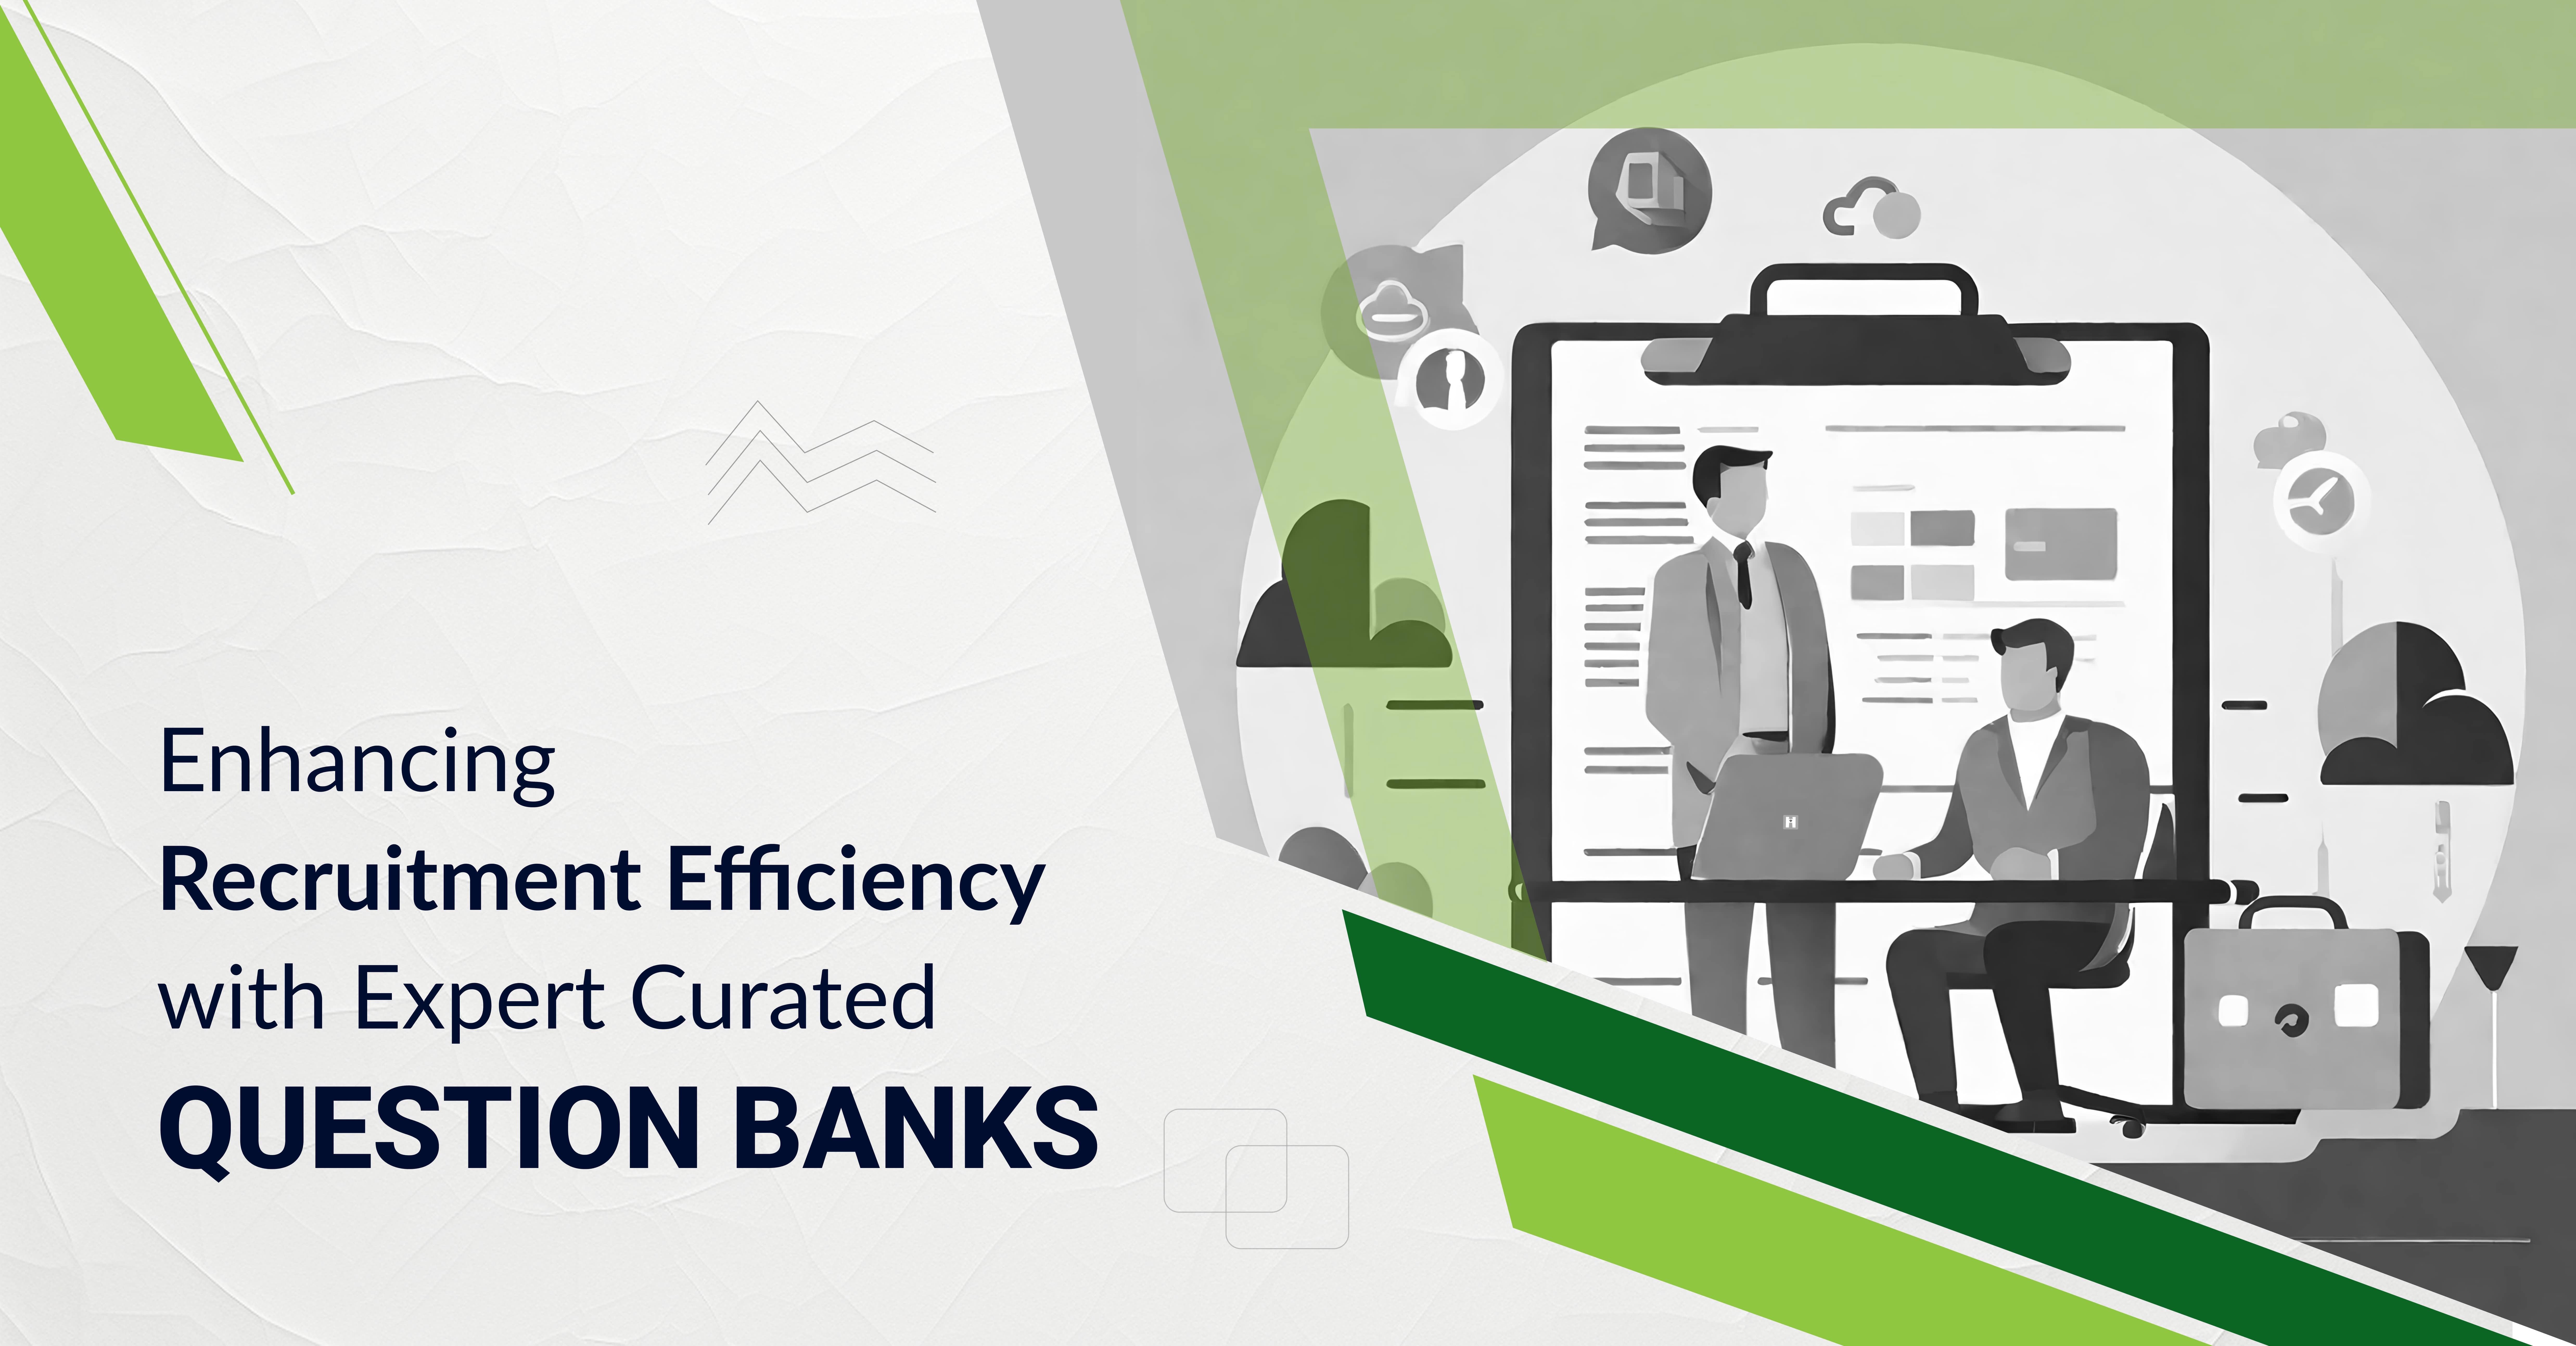 Enhancing Recruitment Efficiency with Expert Curated Question Banks